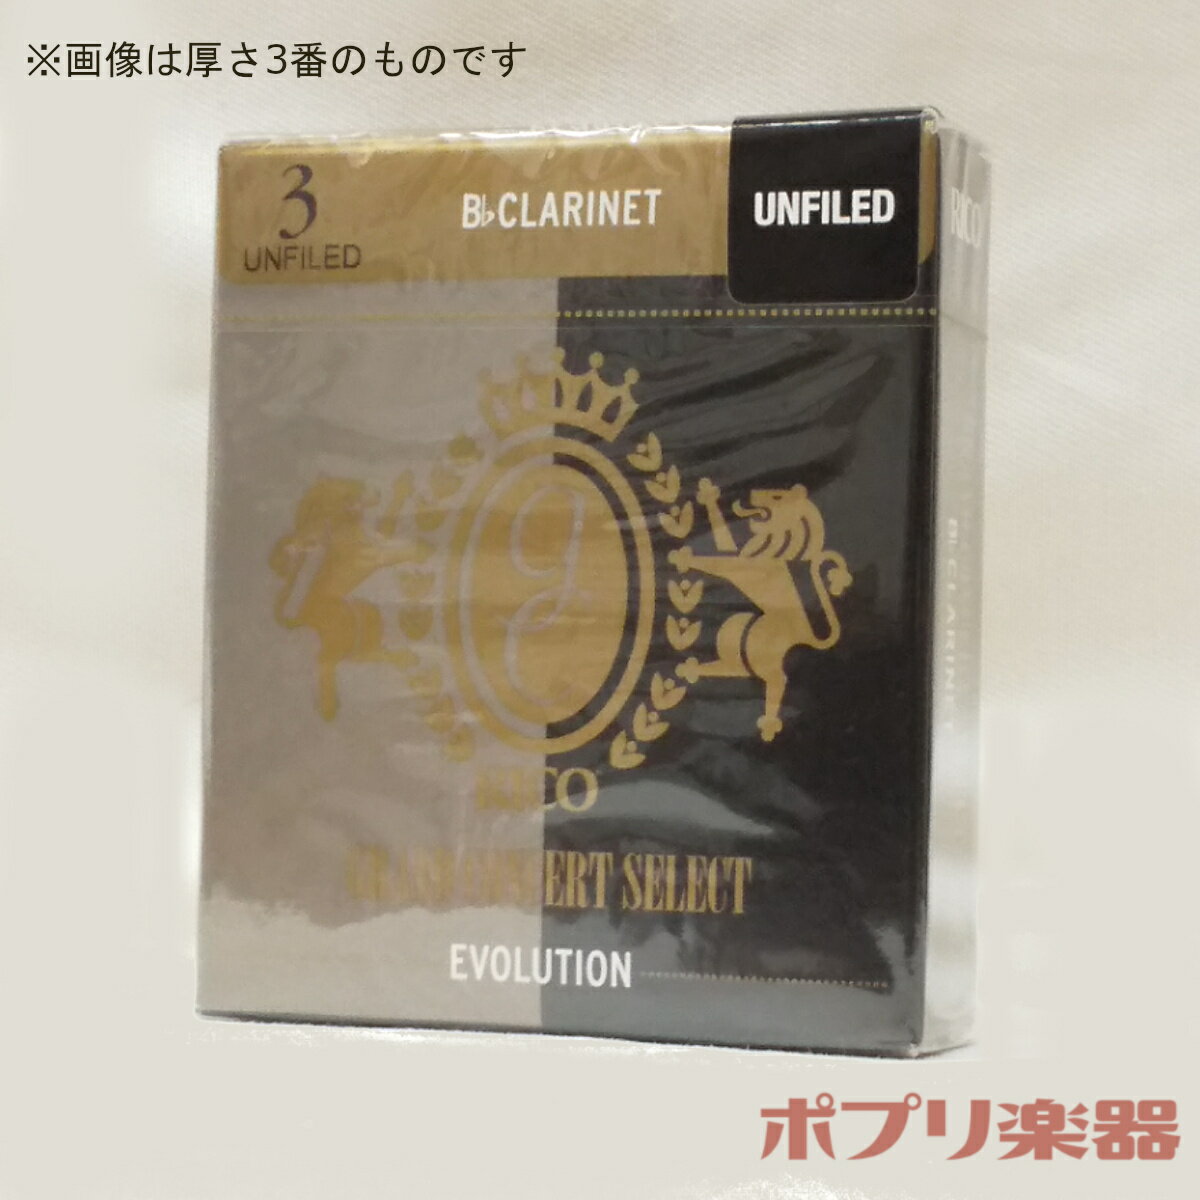 D'Addario Woodwinds (RICO) __I (R) BNlbgp[h OhRT[gZNg GH[V At@Ch 10 Grand Concert Select Traditional Bclarinet